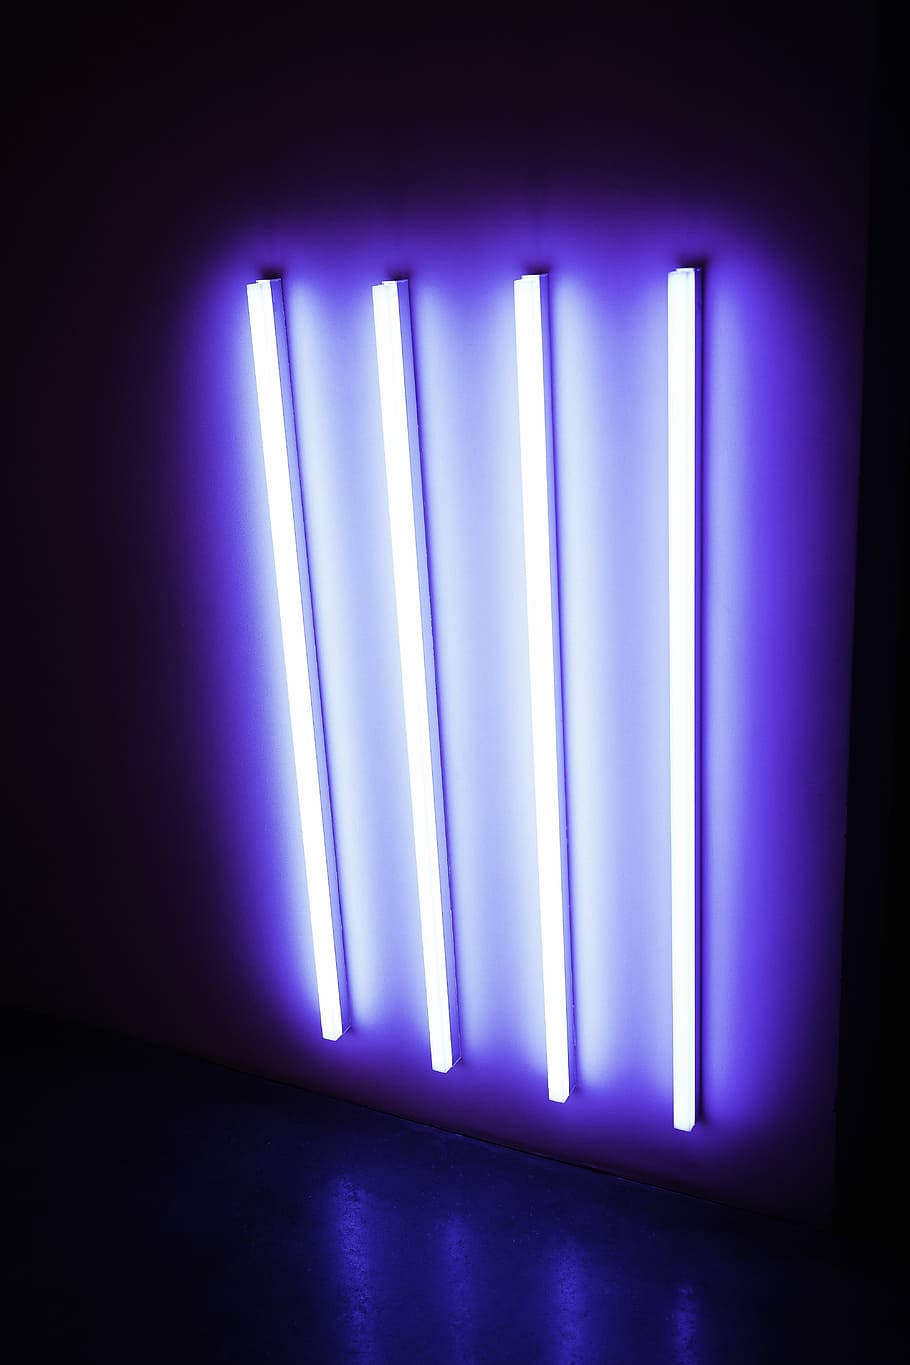 four UV fluorescent lamps turned on, four UV lights, glow, glowing